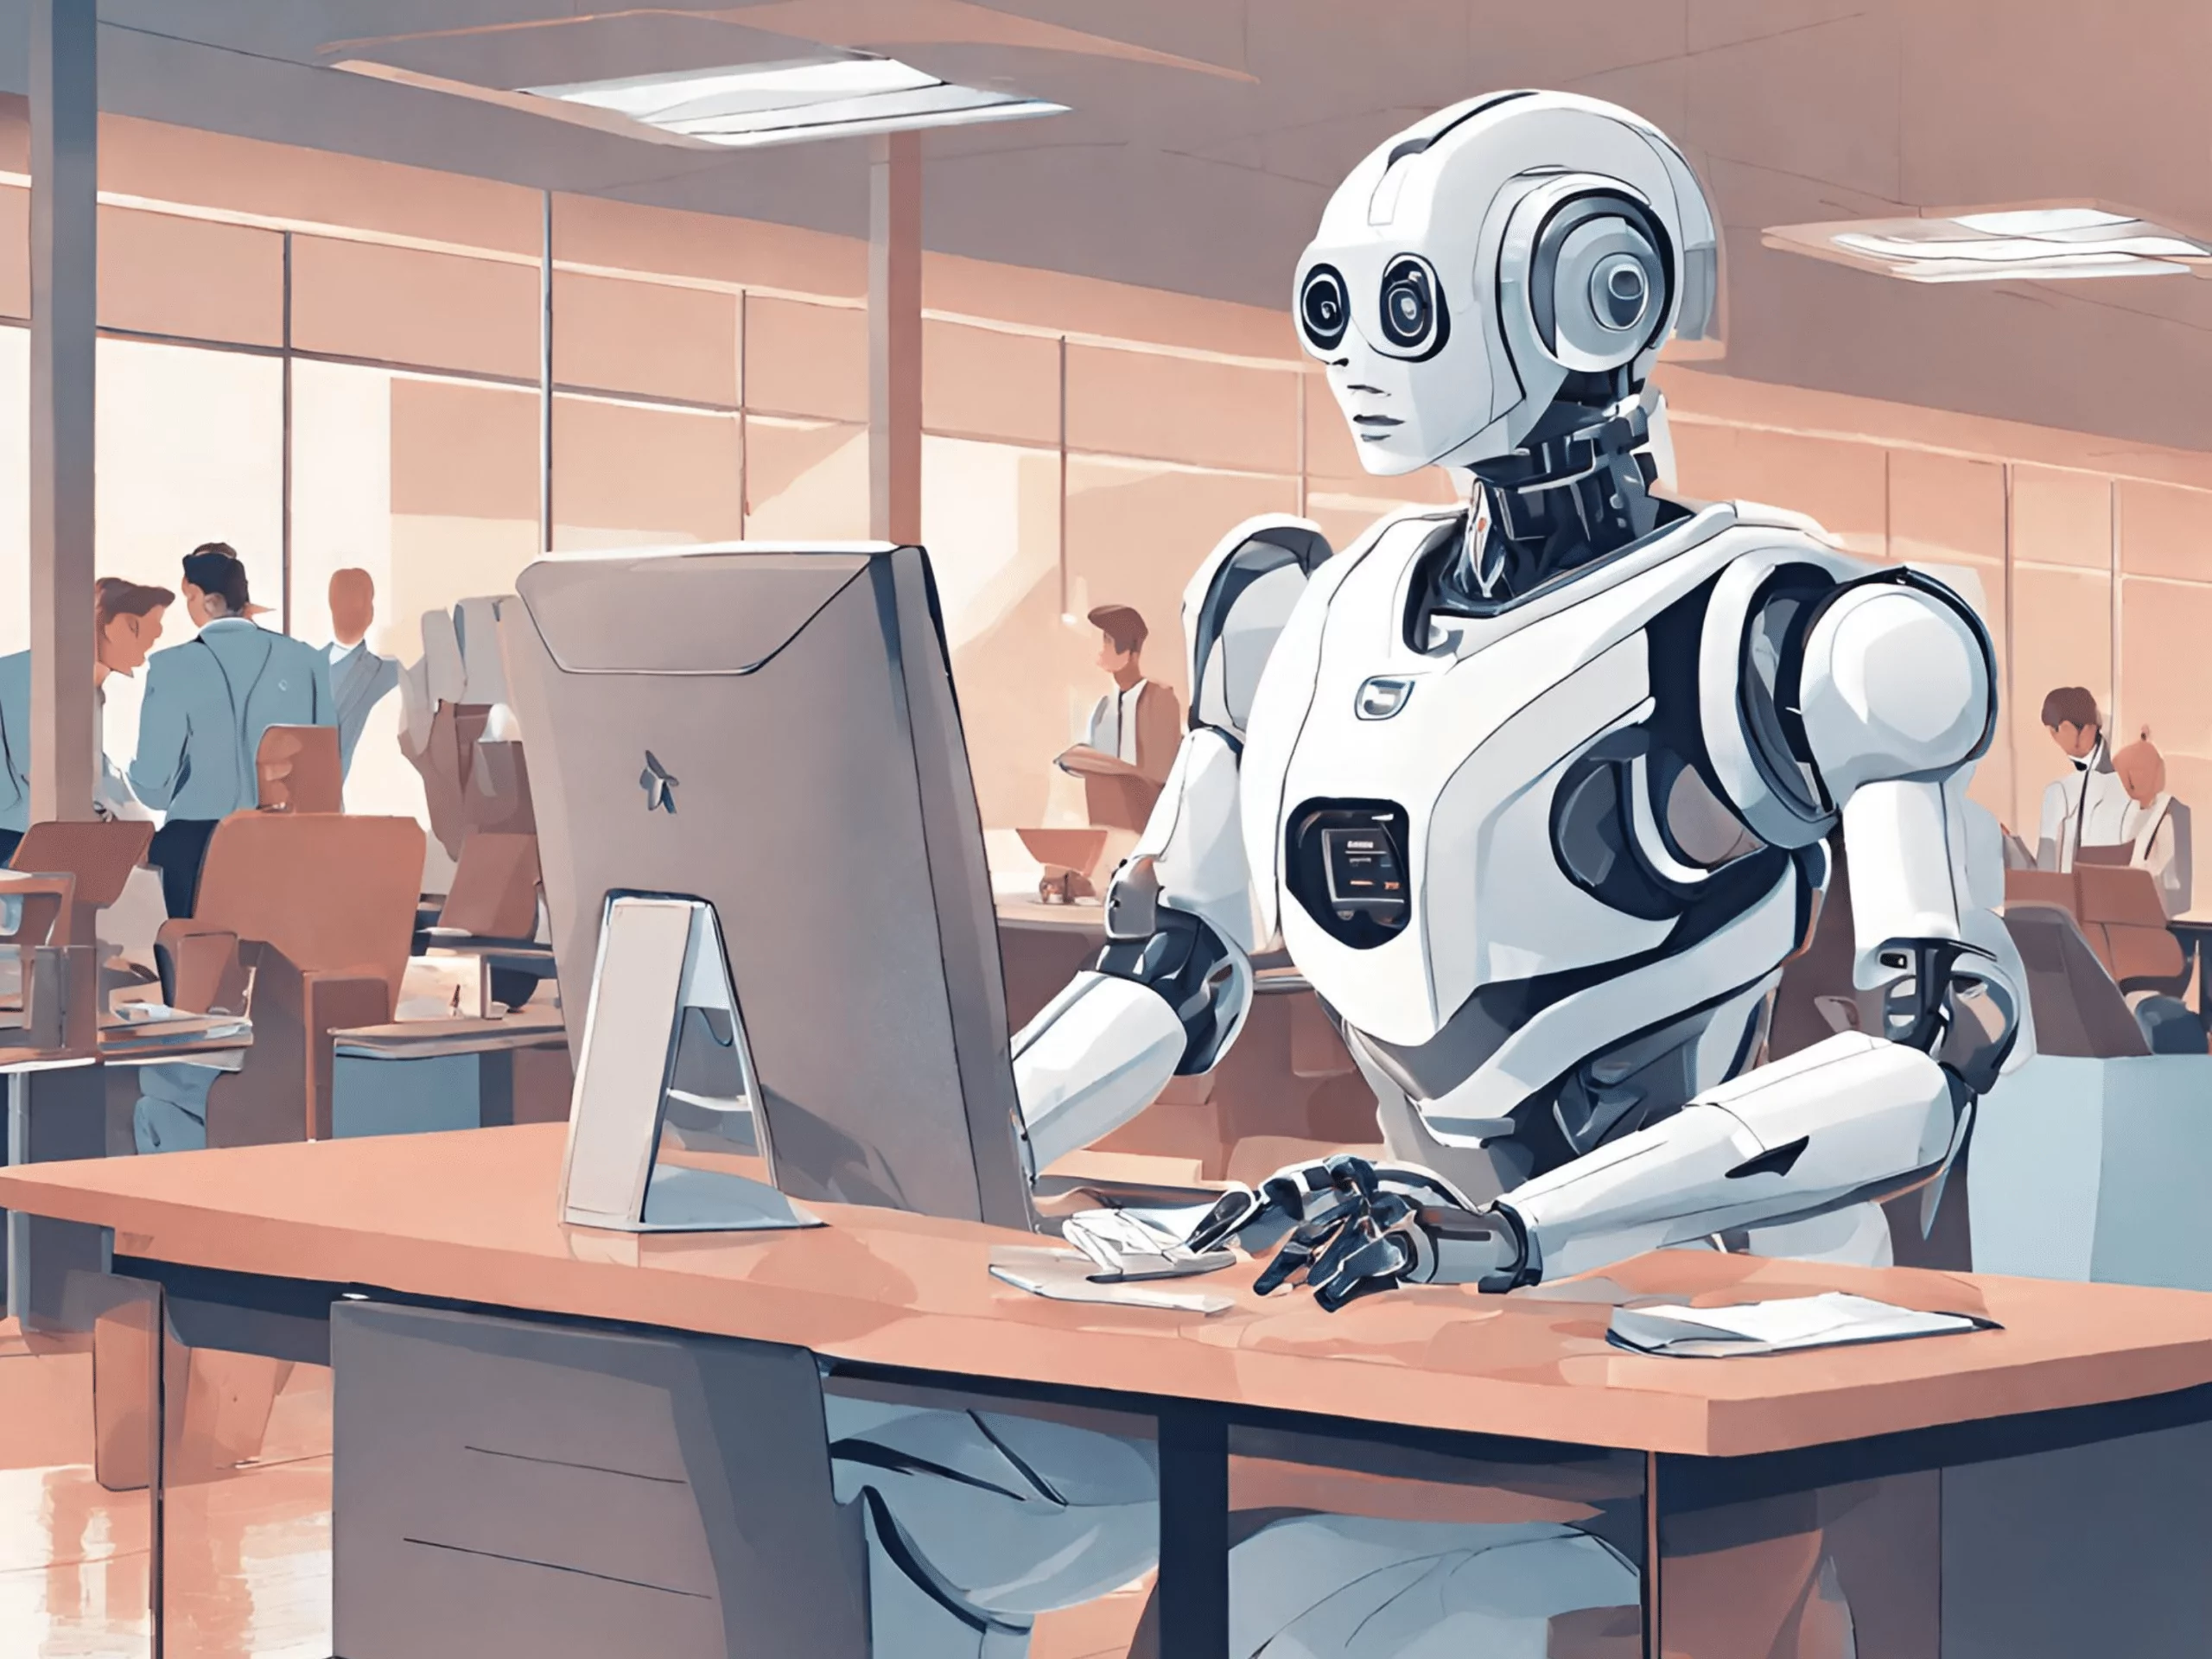 A robot sitting a desk in an office with office workers in the background.